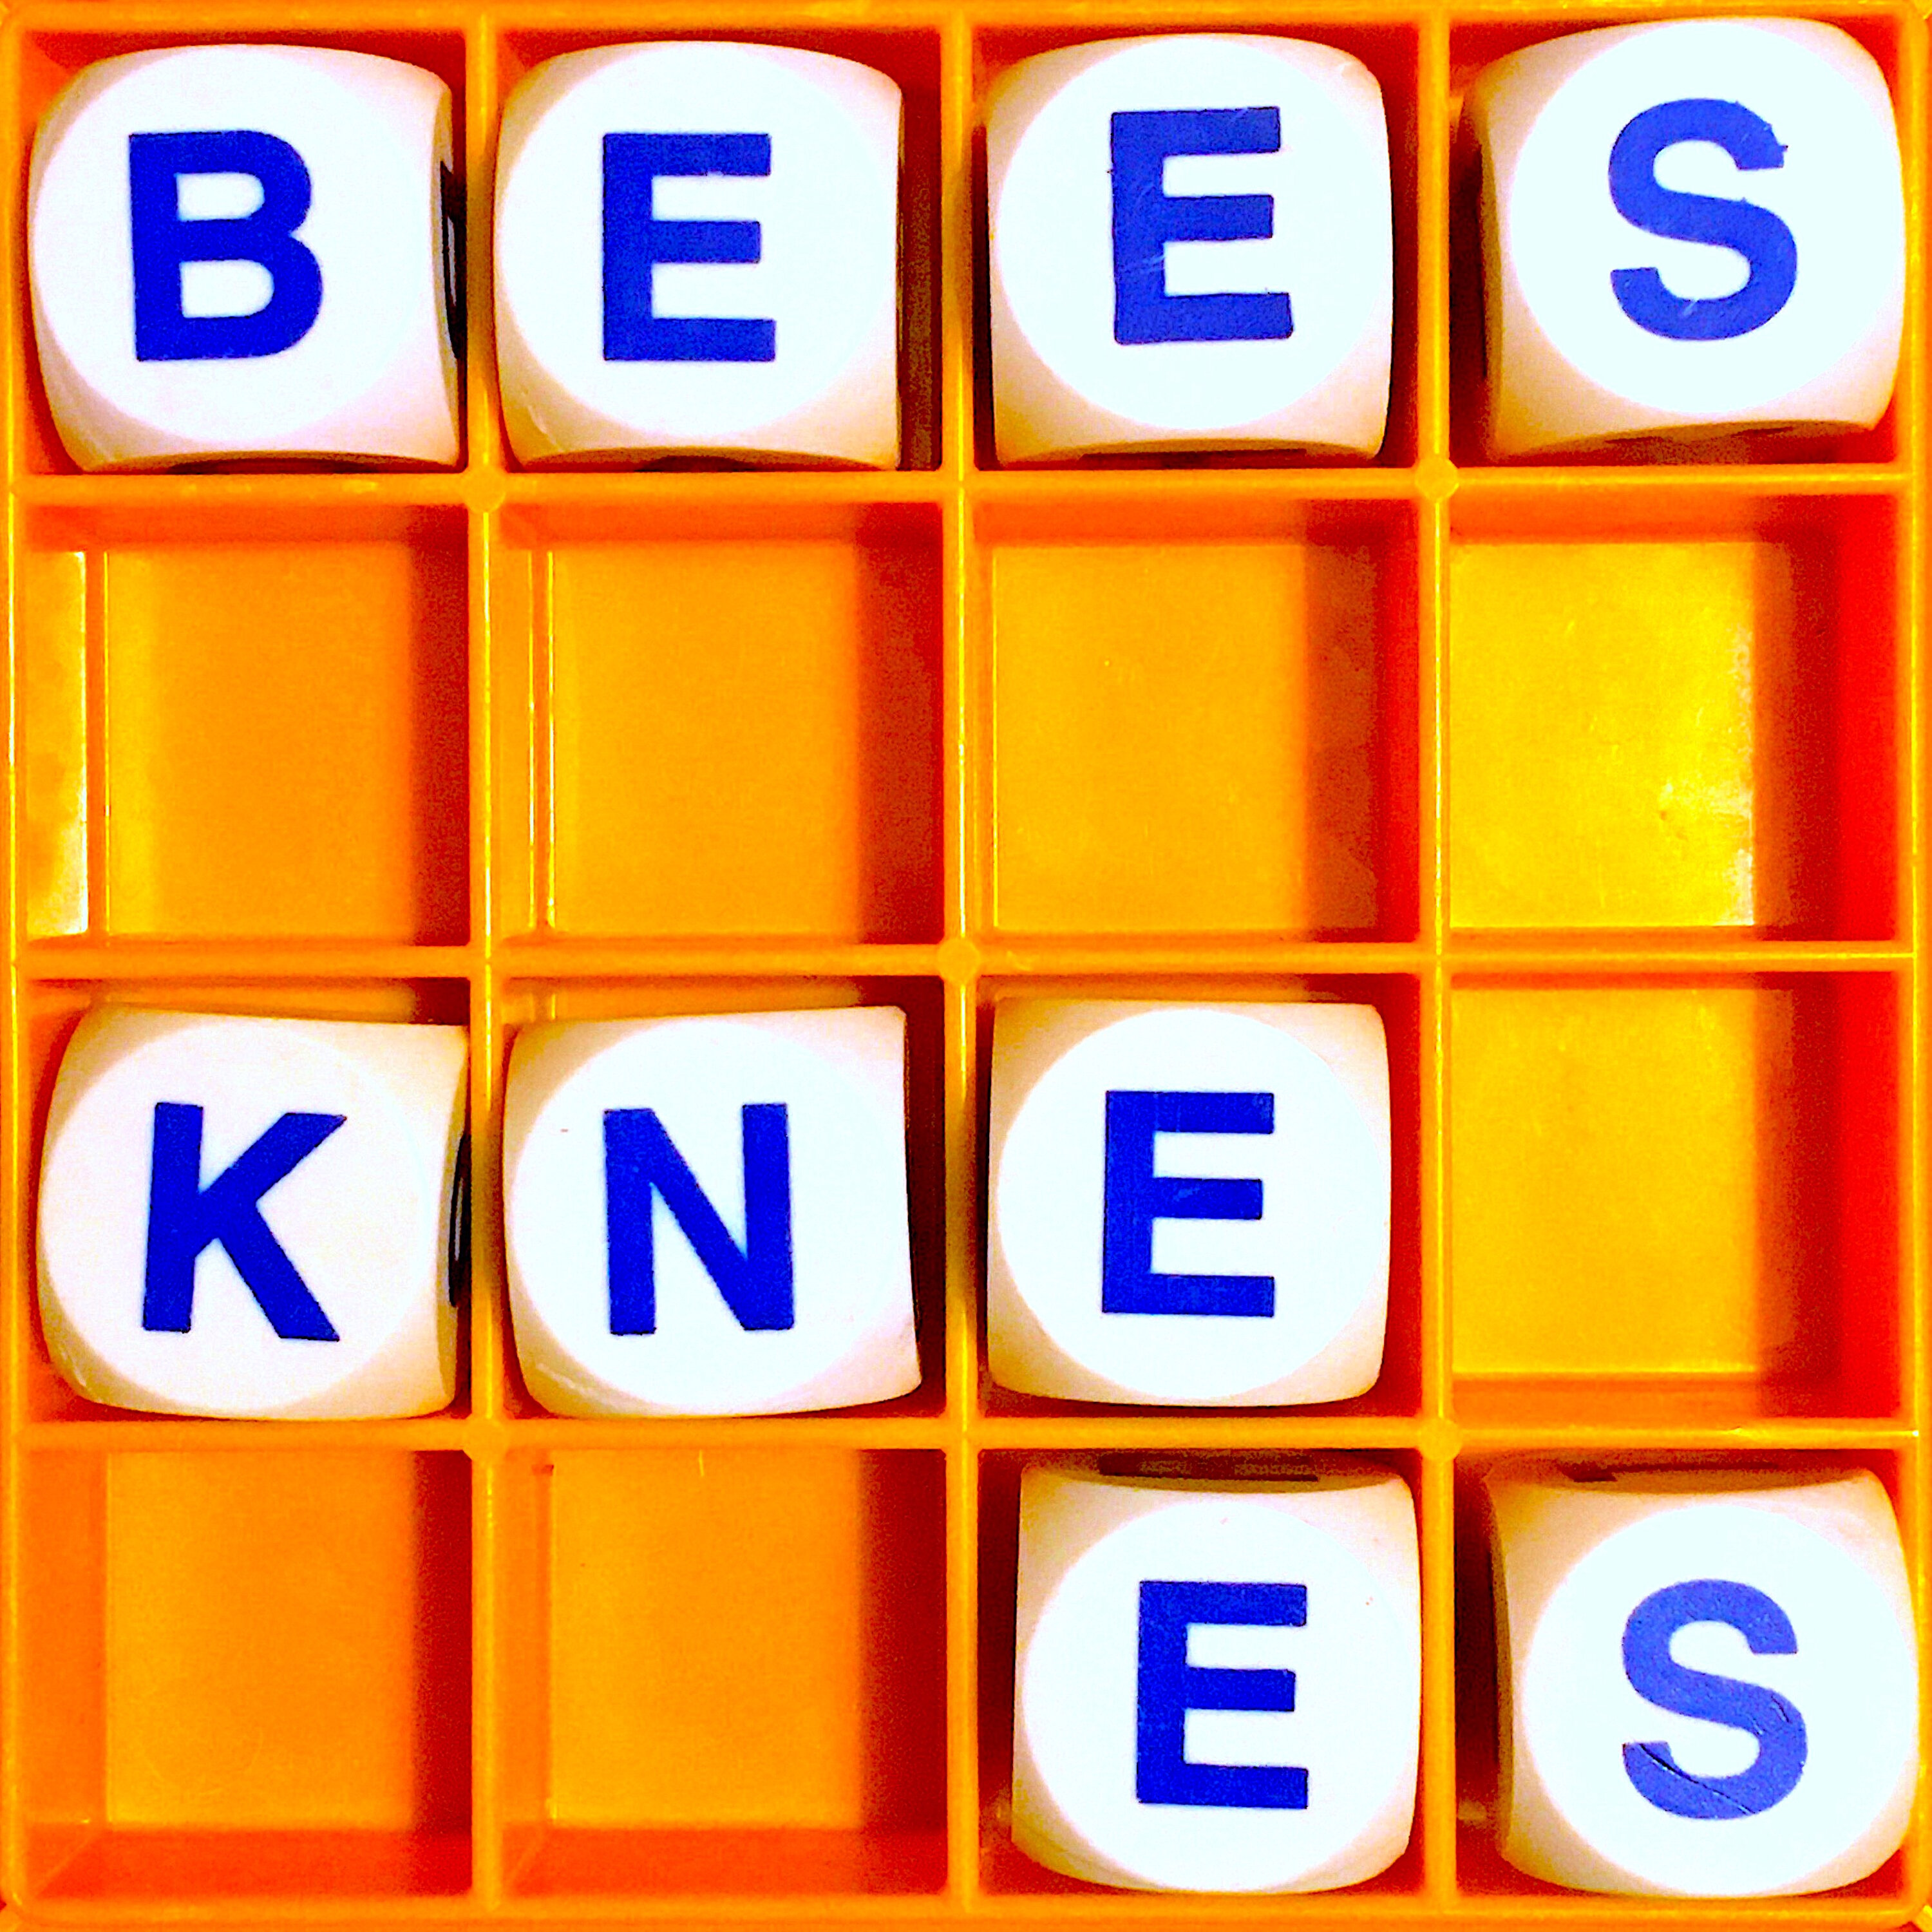 Thumbnail for "151. The Bee's Knees".